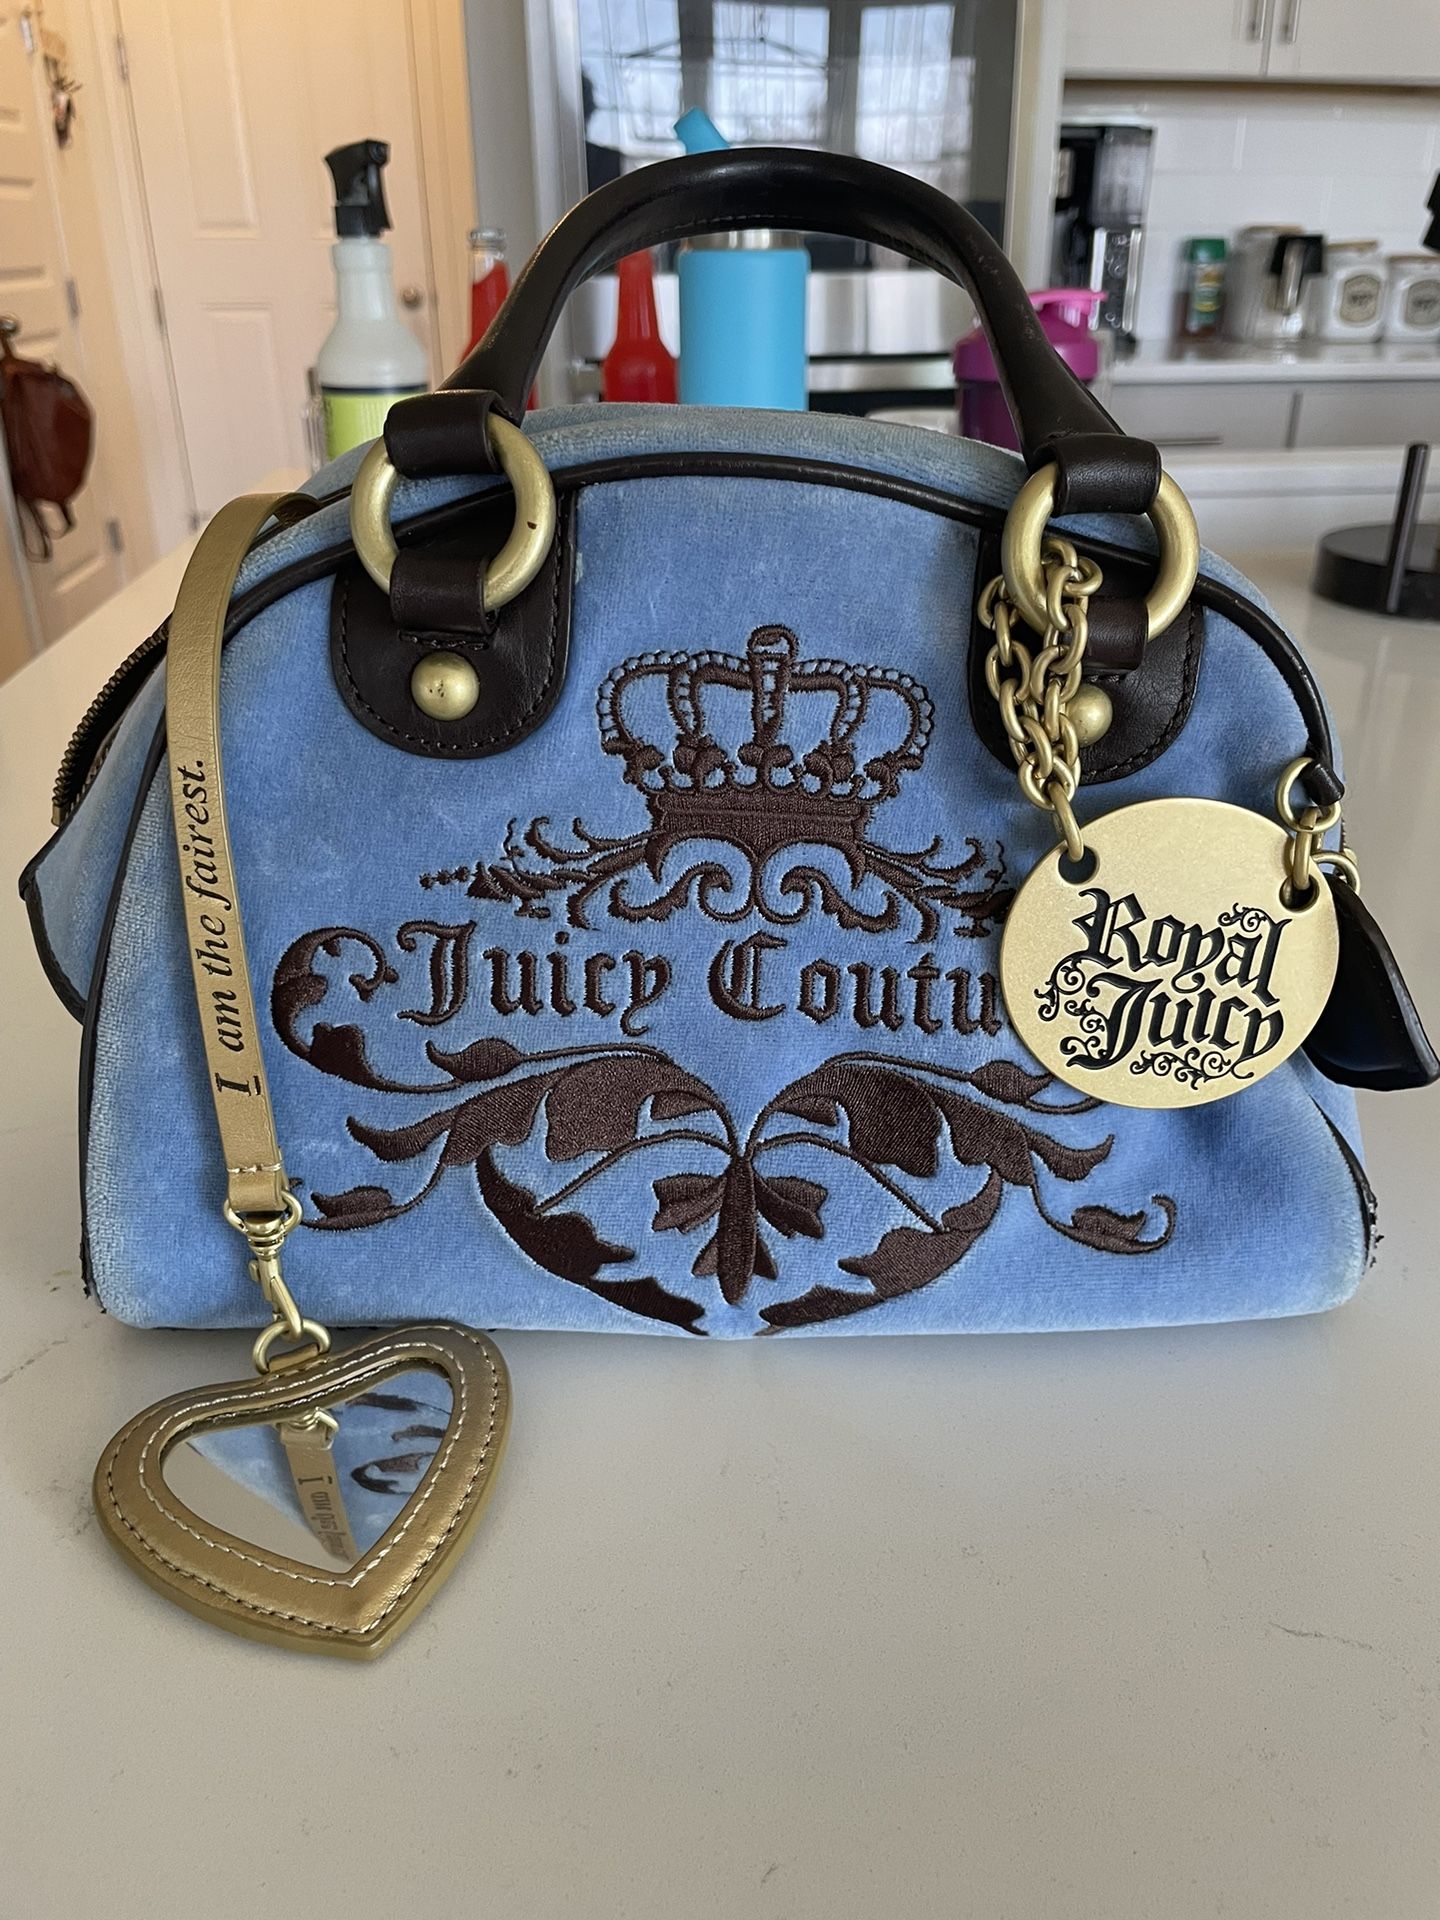 Juicy Couture Bag 